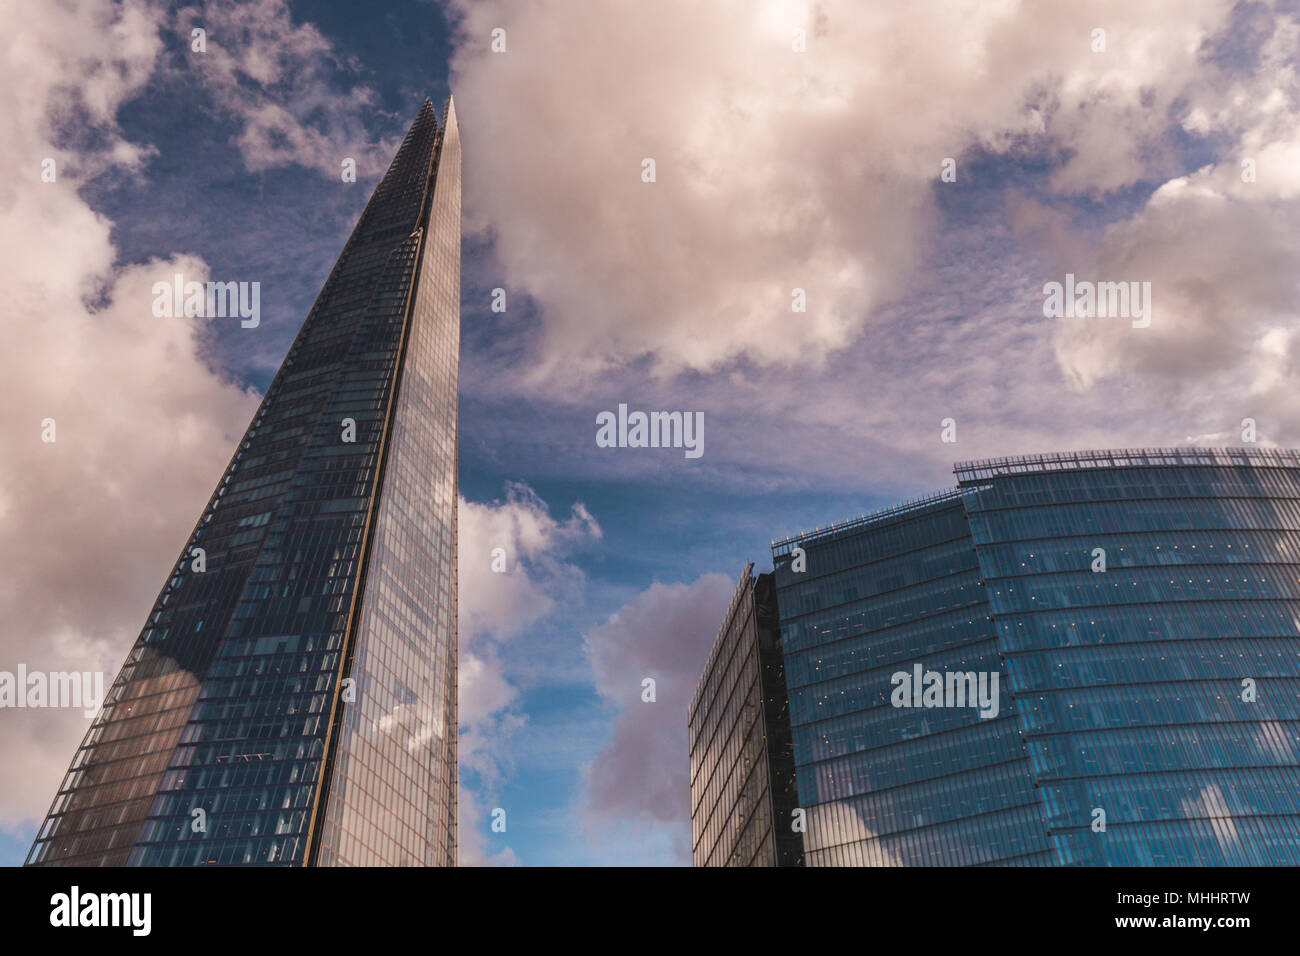 LONDON - APRIL 26, 2018: The Shard building in London with blue sky and white clouds Stock Photo